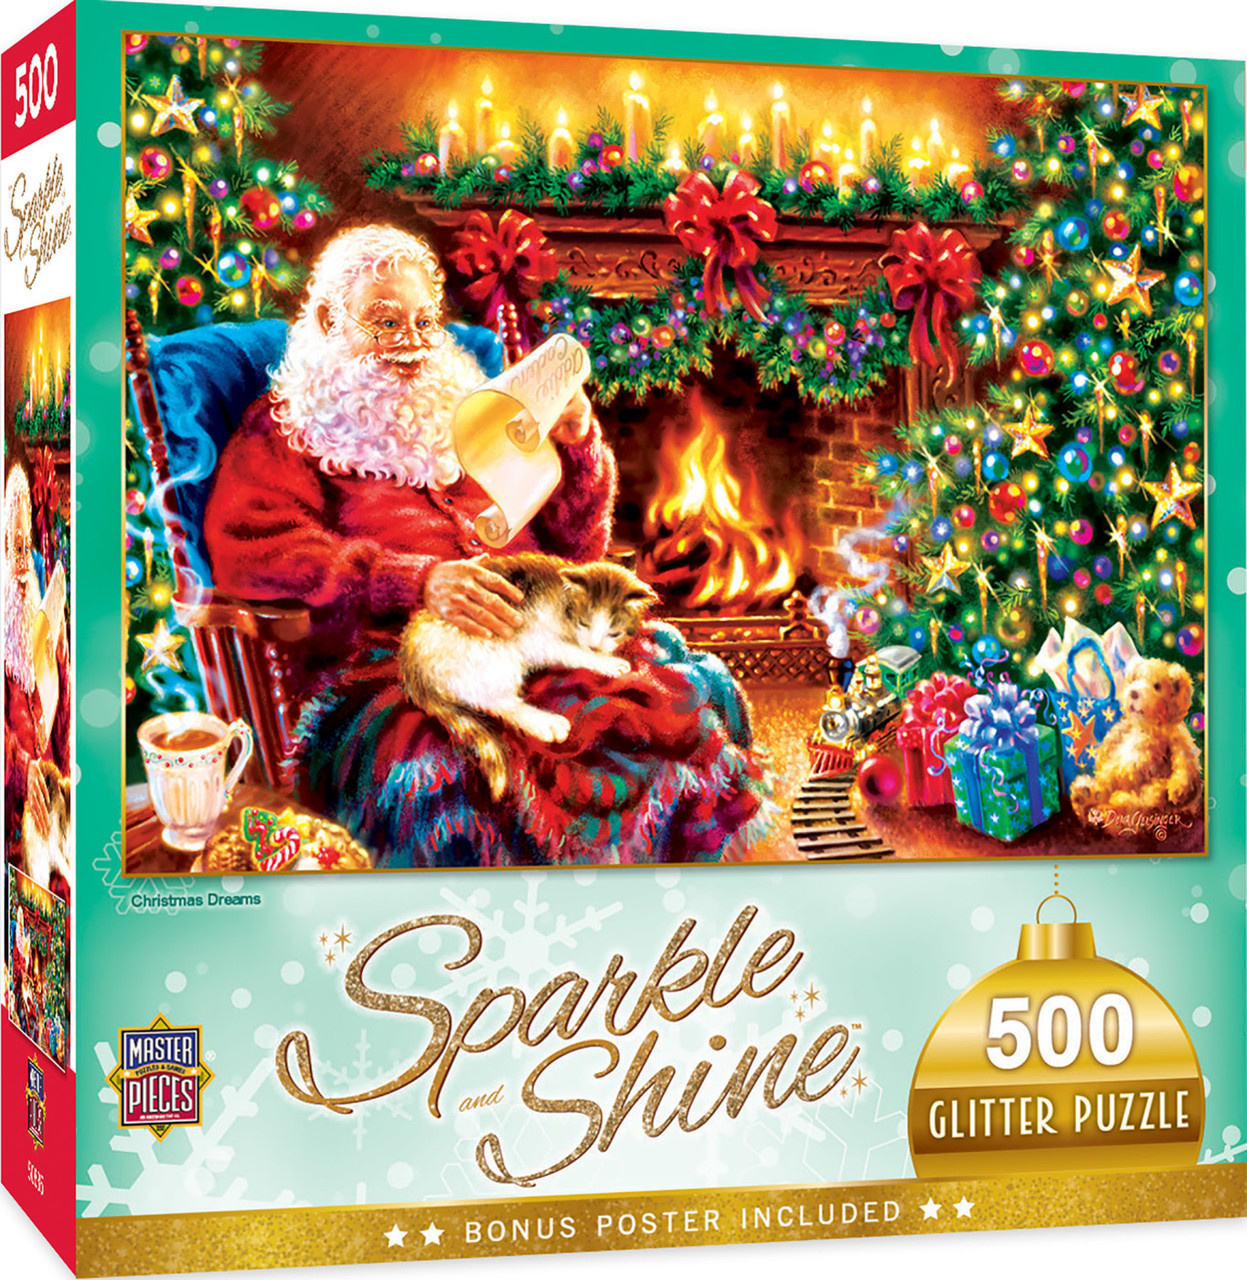 Masterpiece Holiday - Christmas Dreams 500pc Glitter Puzzle